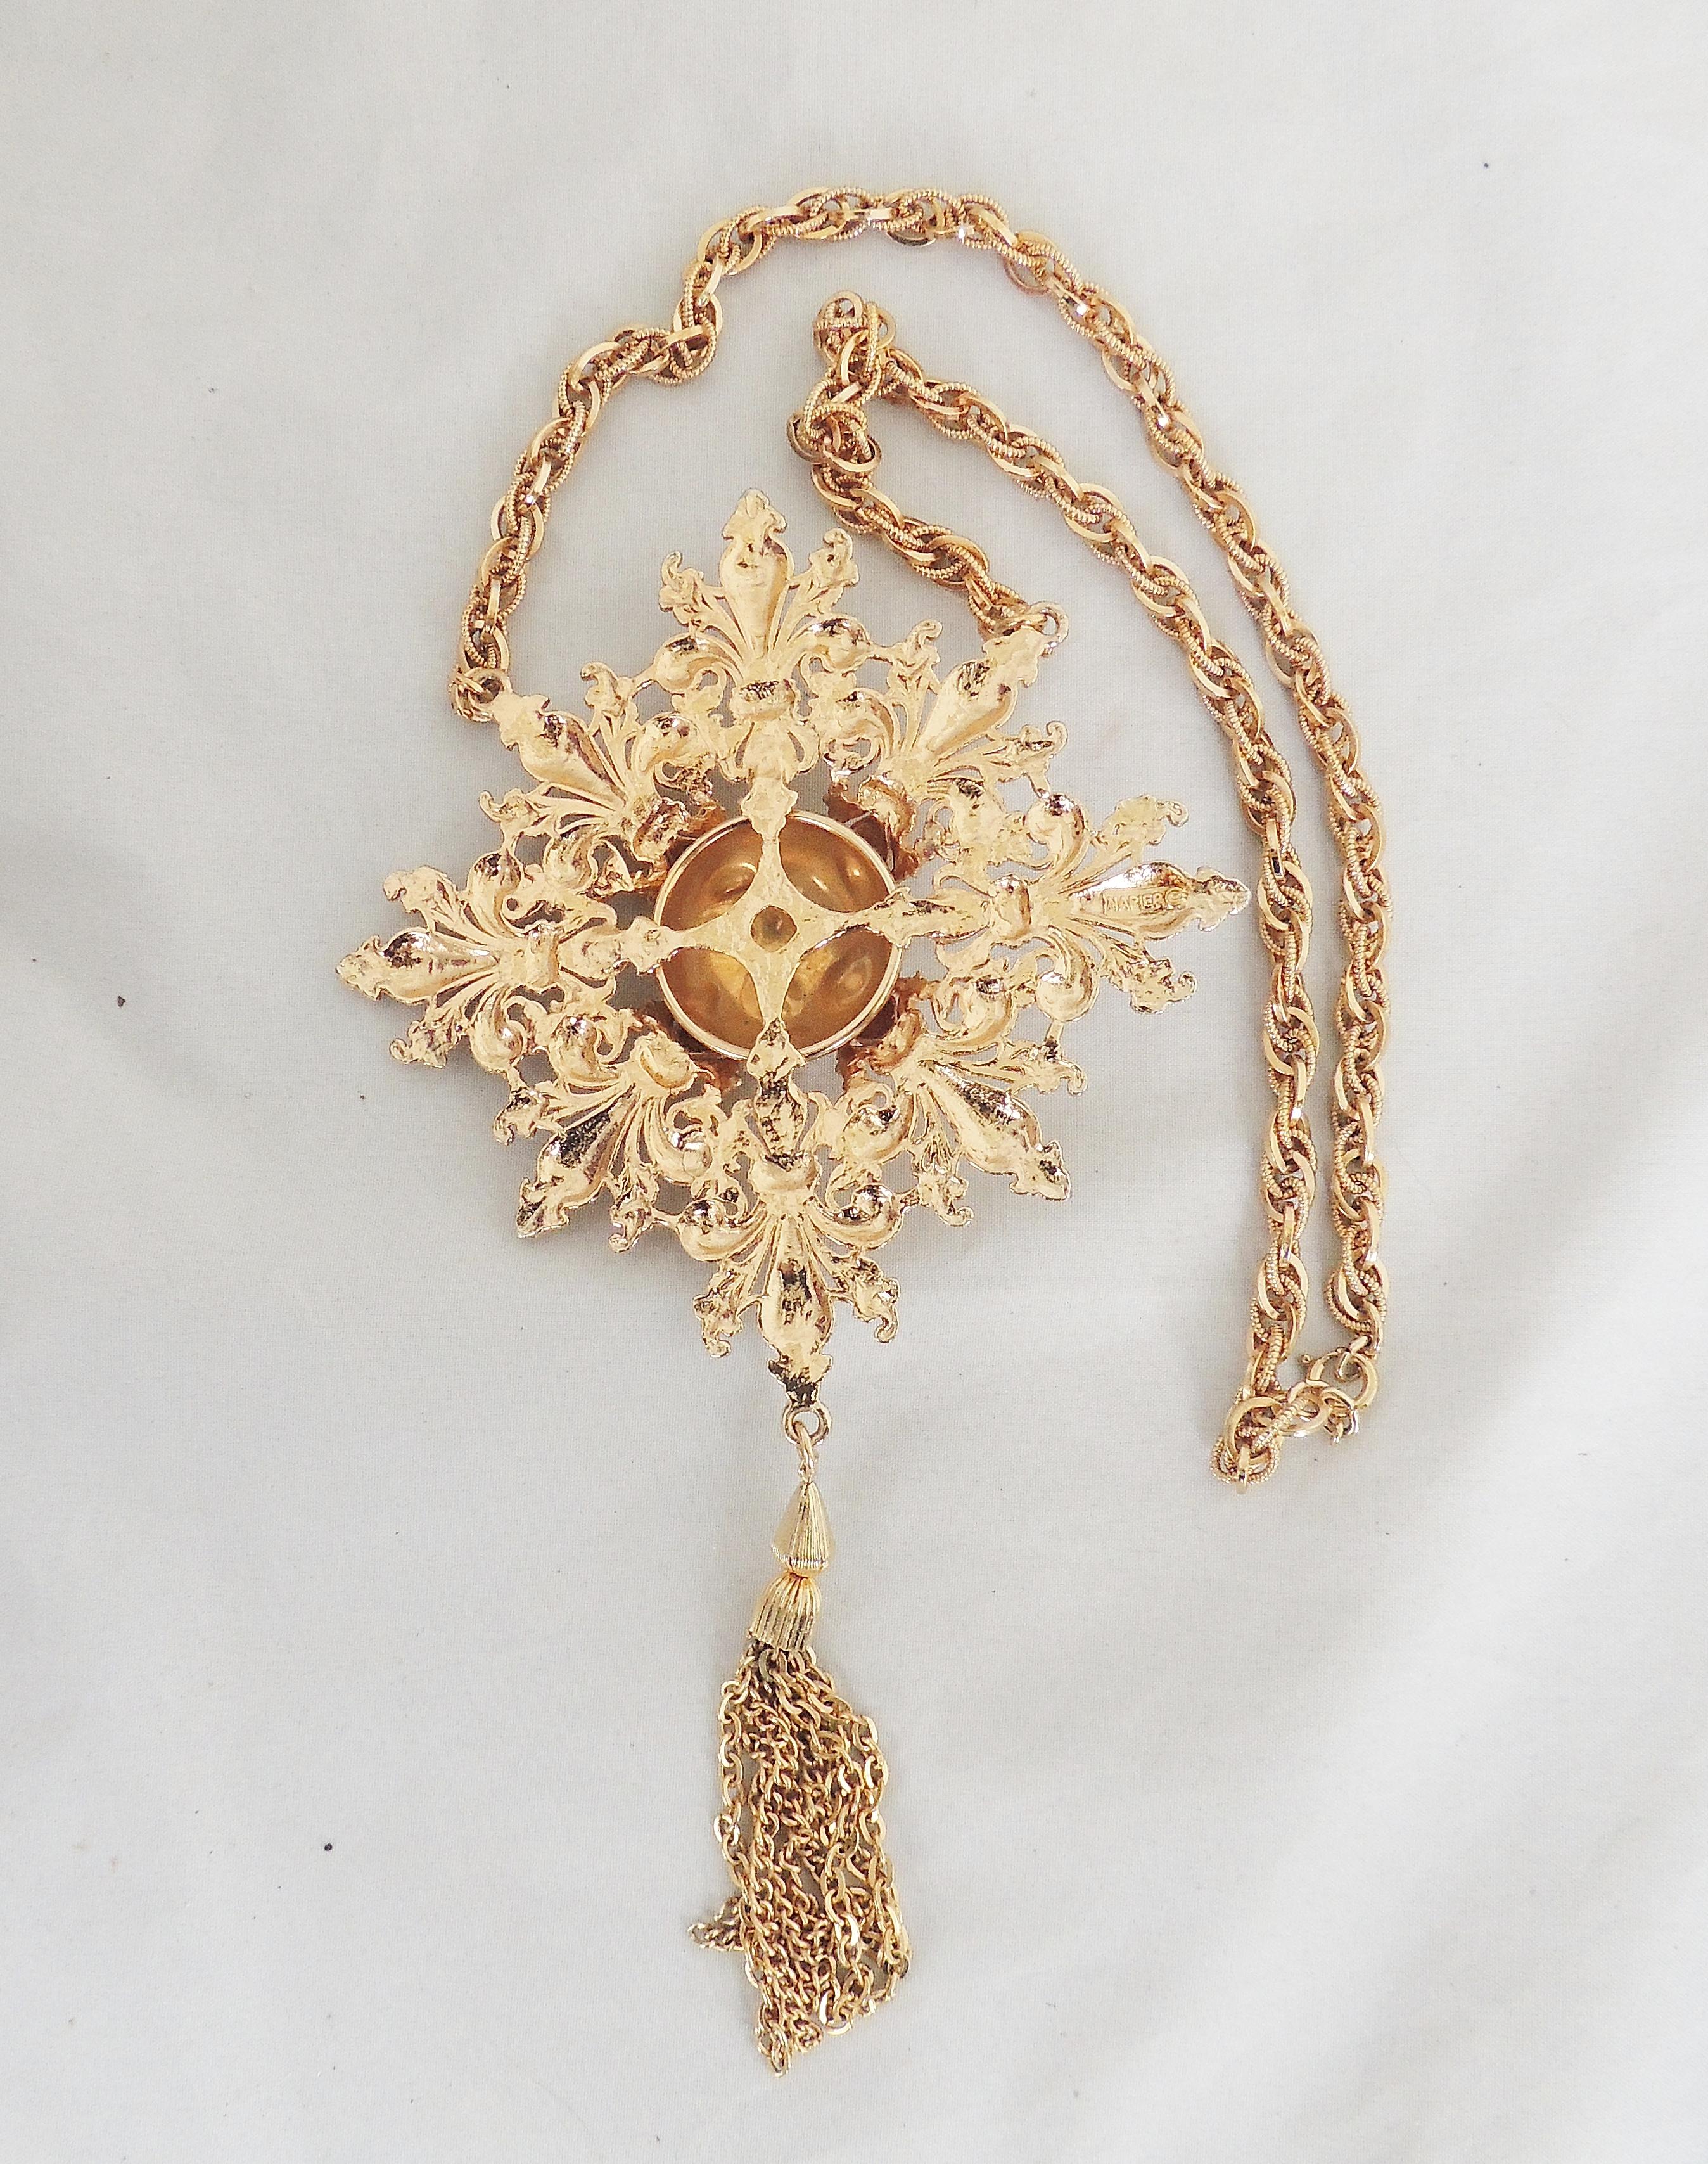 Napier modernist goldtone tassel necklace with spring ring clasp. Marked 